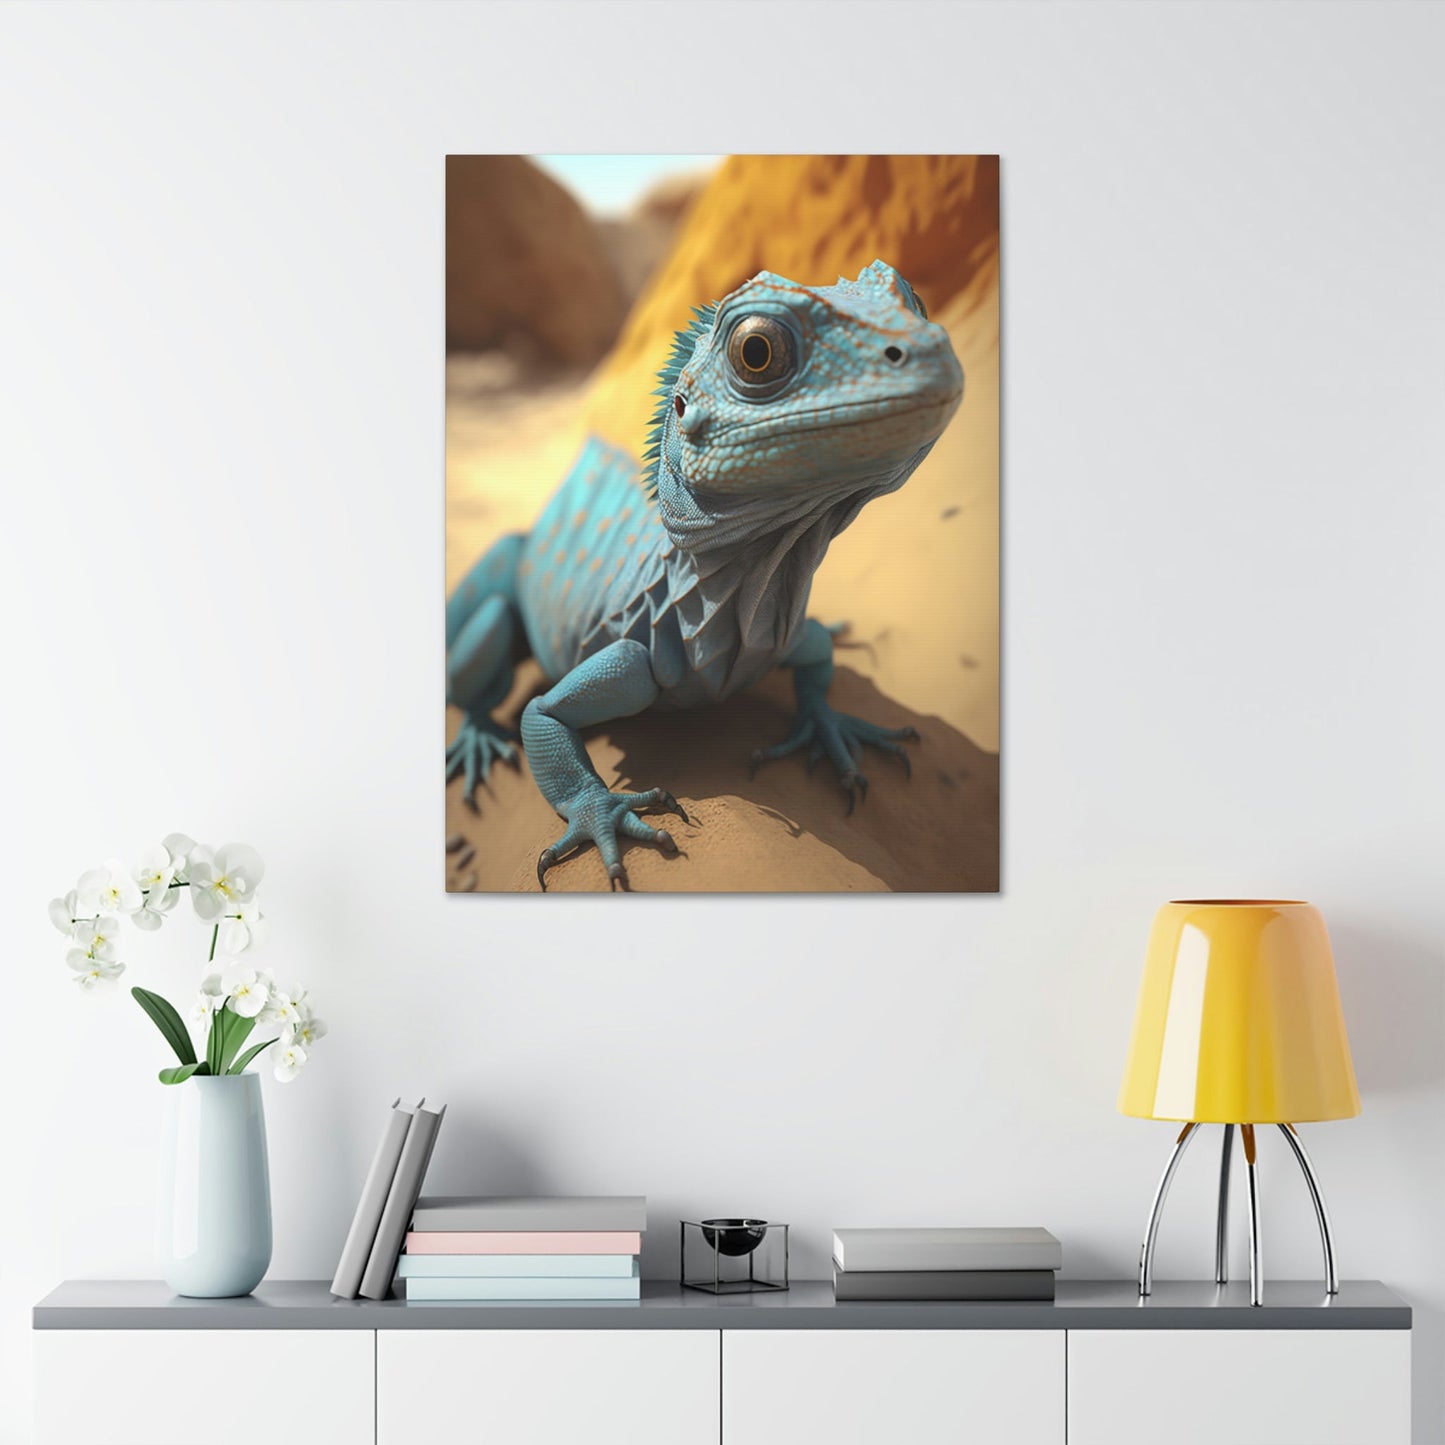 Lizard in the Wild: Vibrant Canvas and Poster of a Majestic Reptile